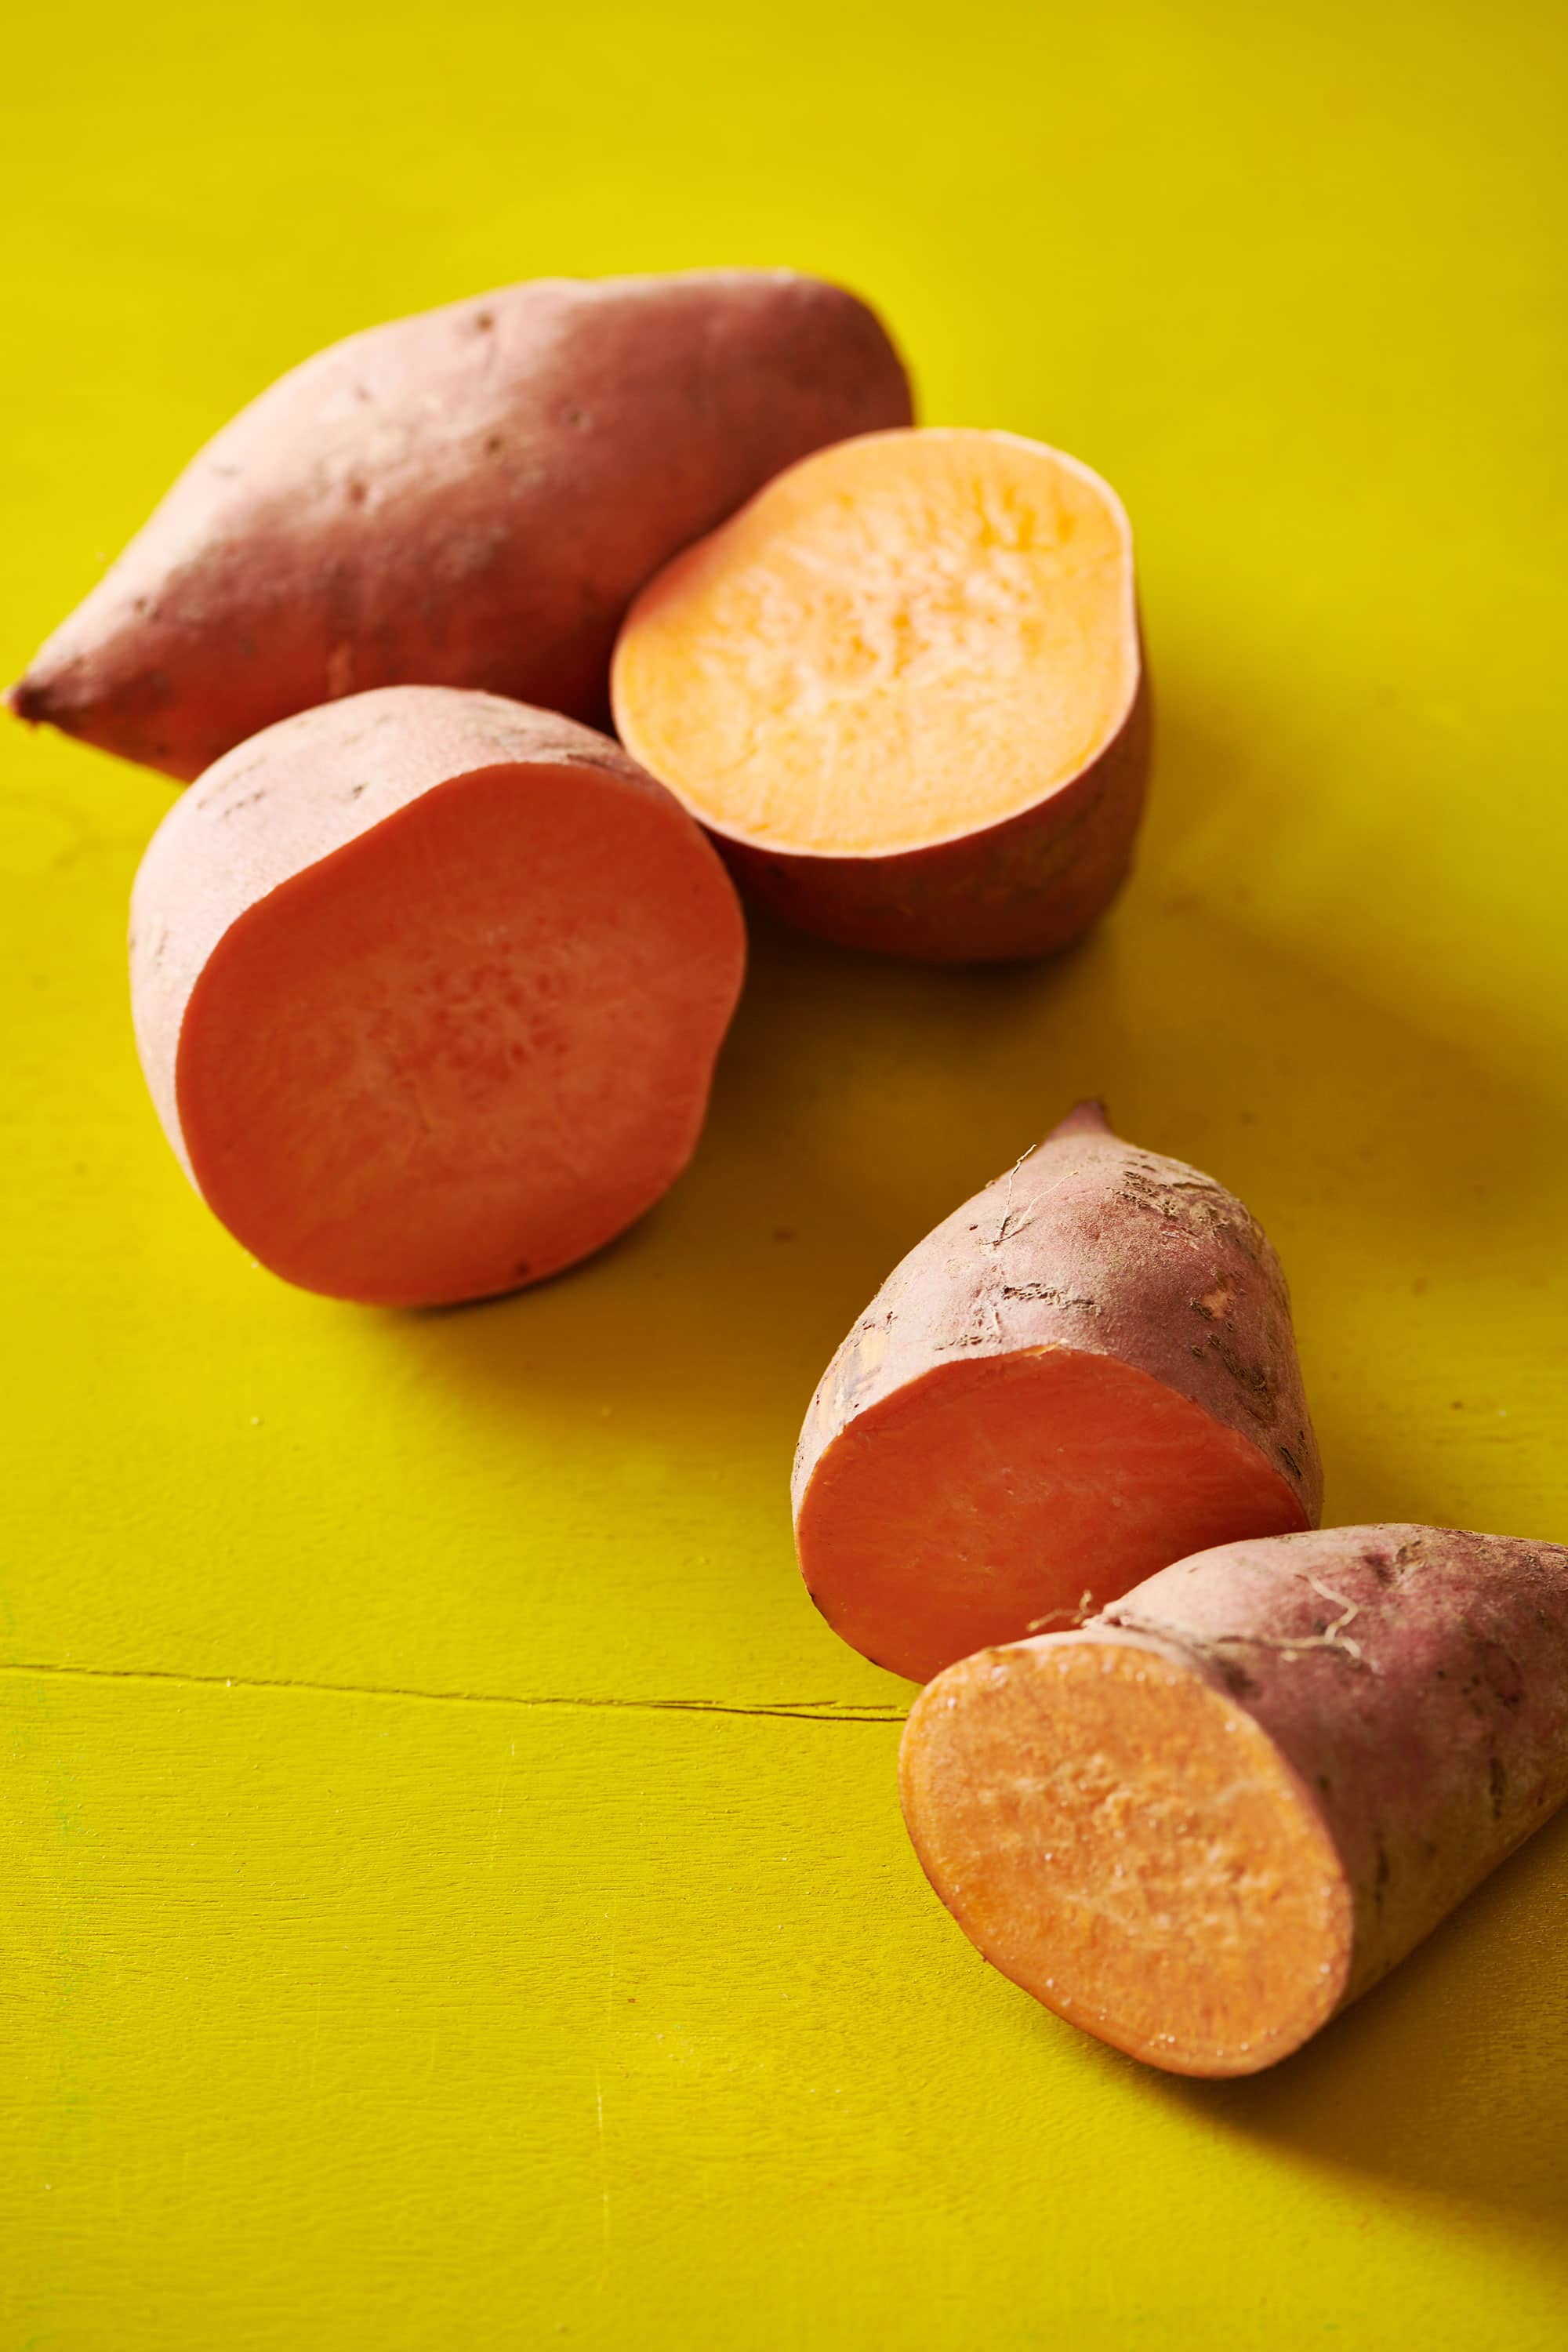 Halved sweet potatoes on a yellow table.